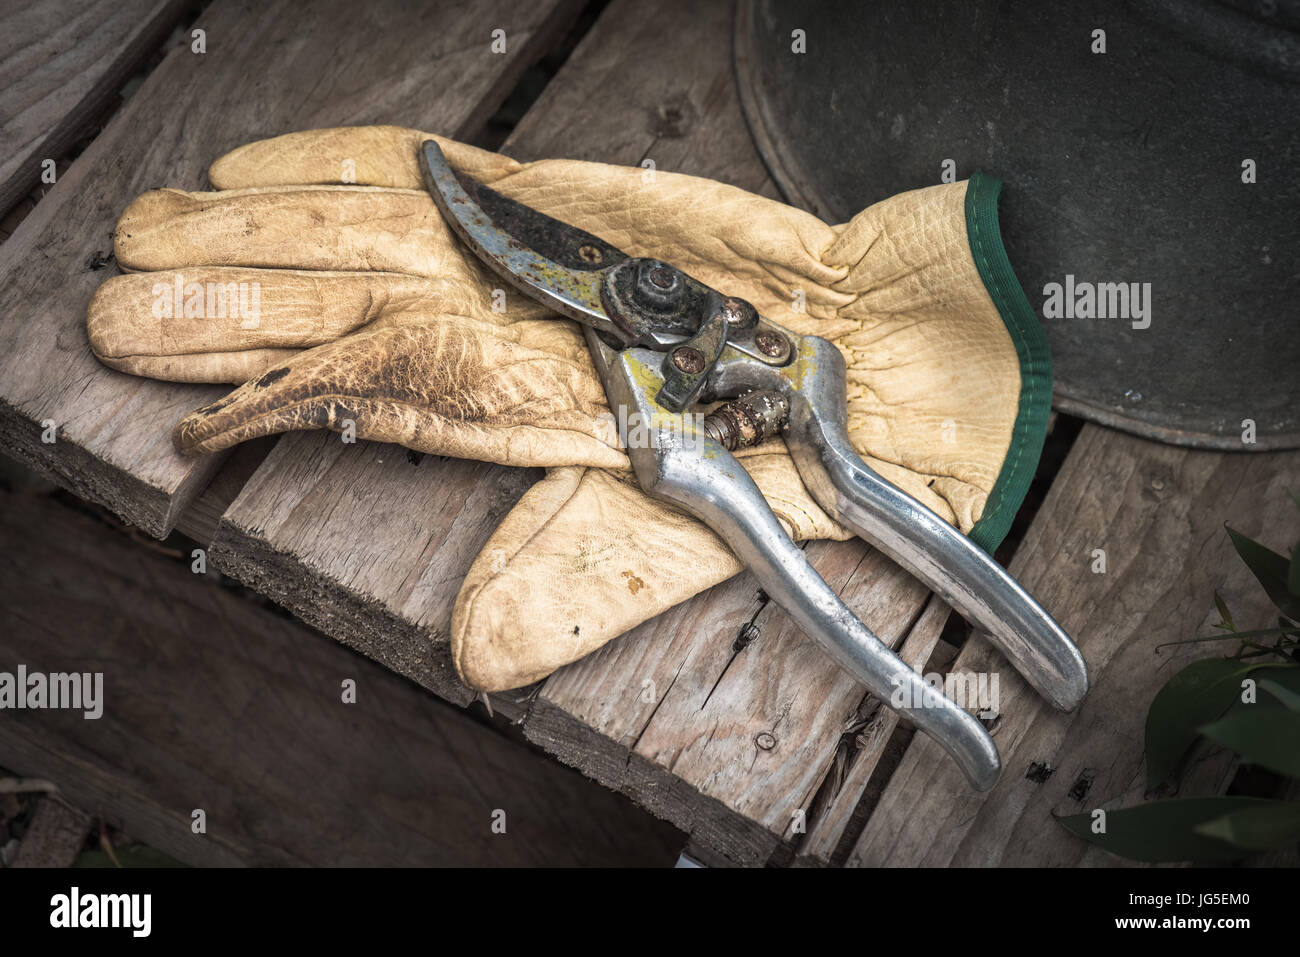 A gardening glove and pruning shears after a hard day in the garden. Stock Photo